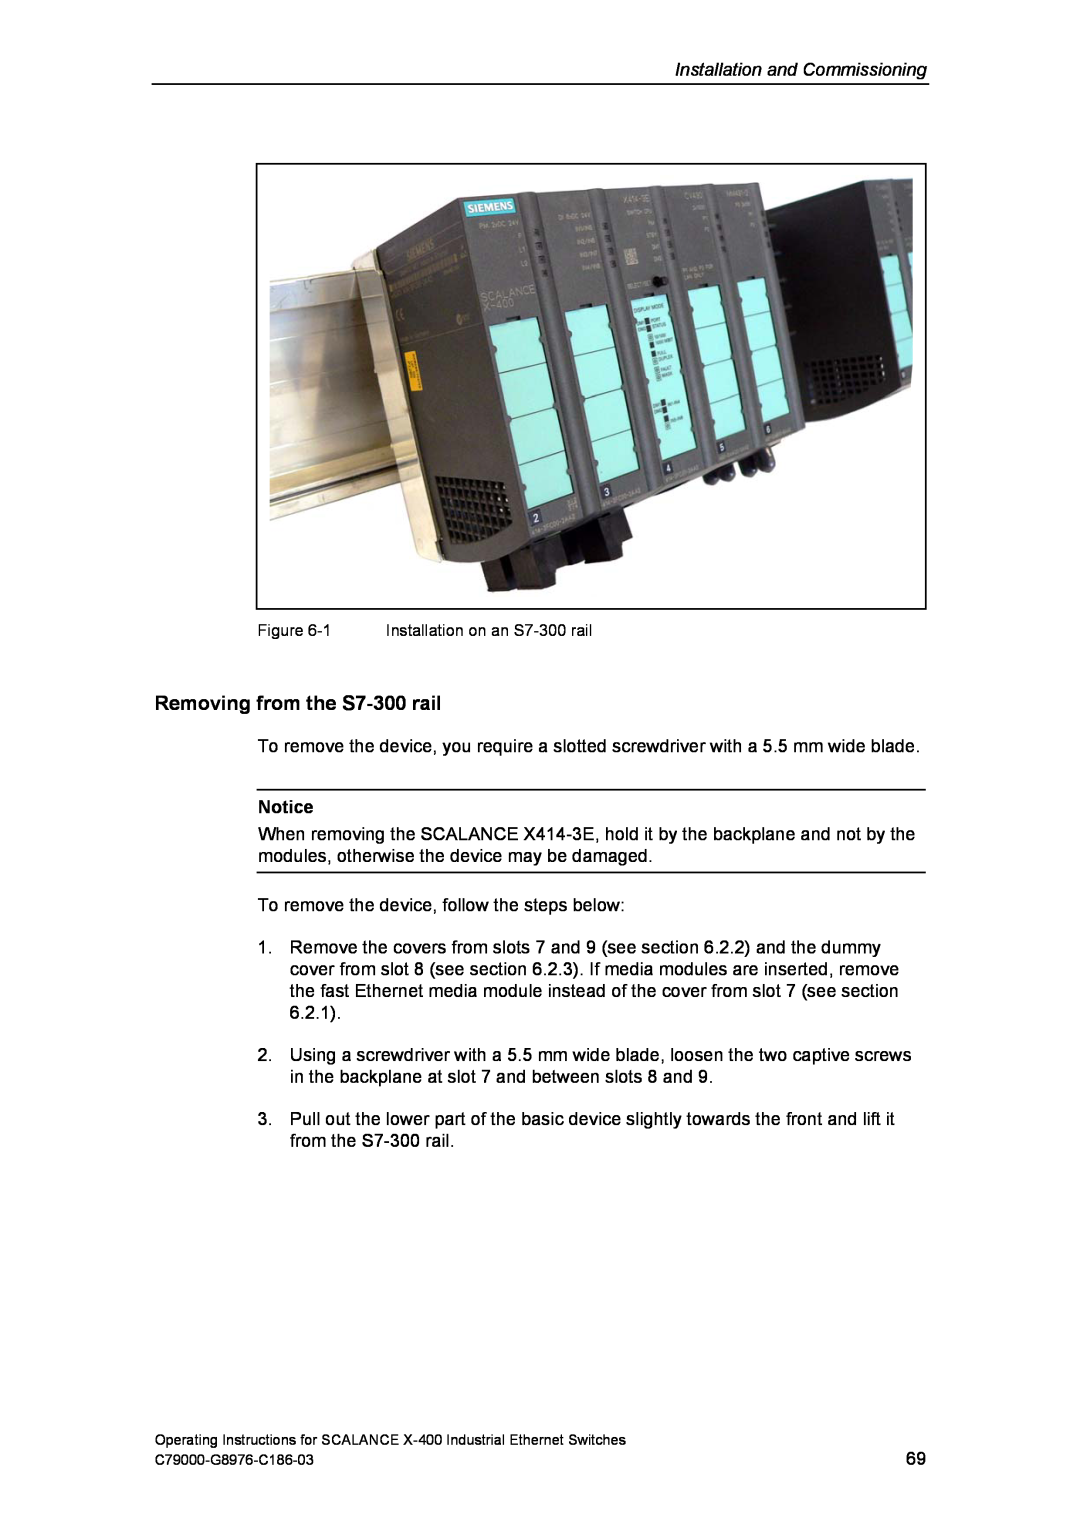 Siemens X-400 technical specifications Removing from the S7-300 rail, Installation and Commissioning 